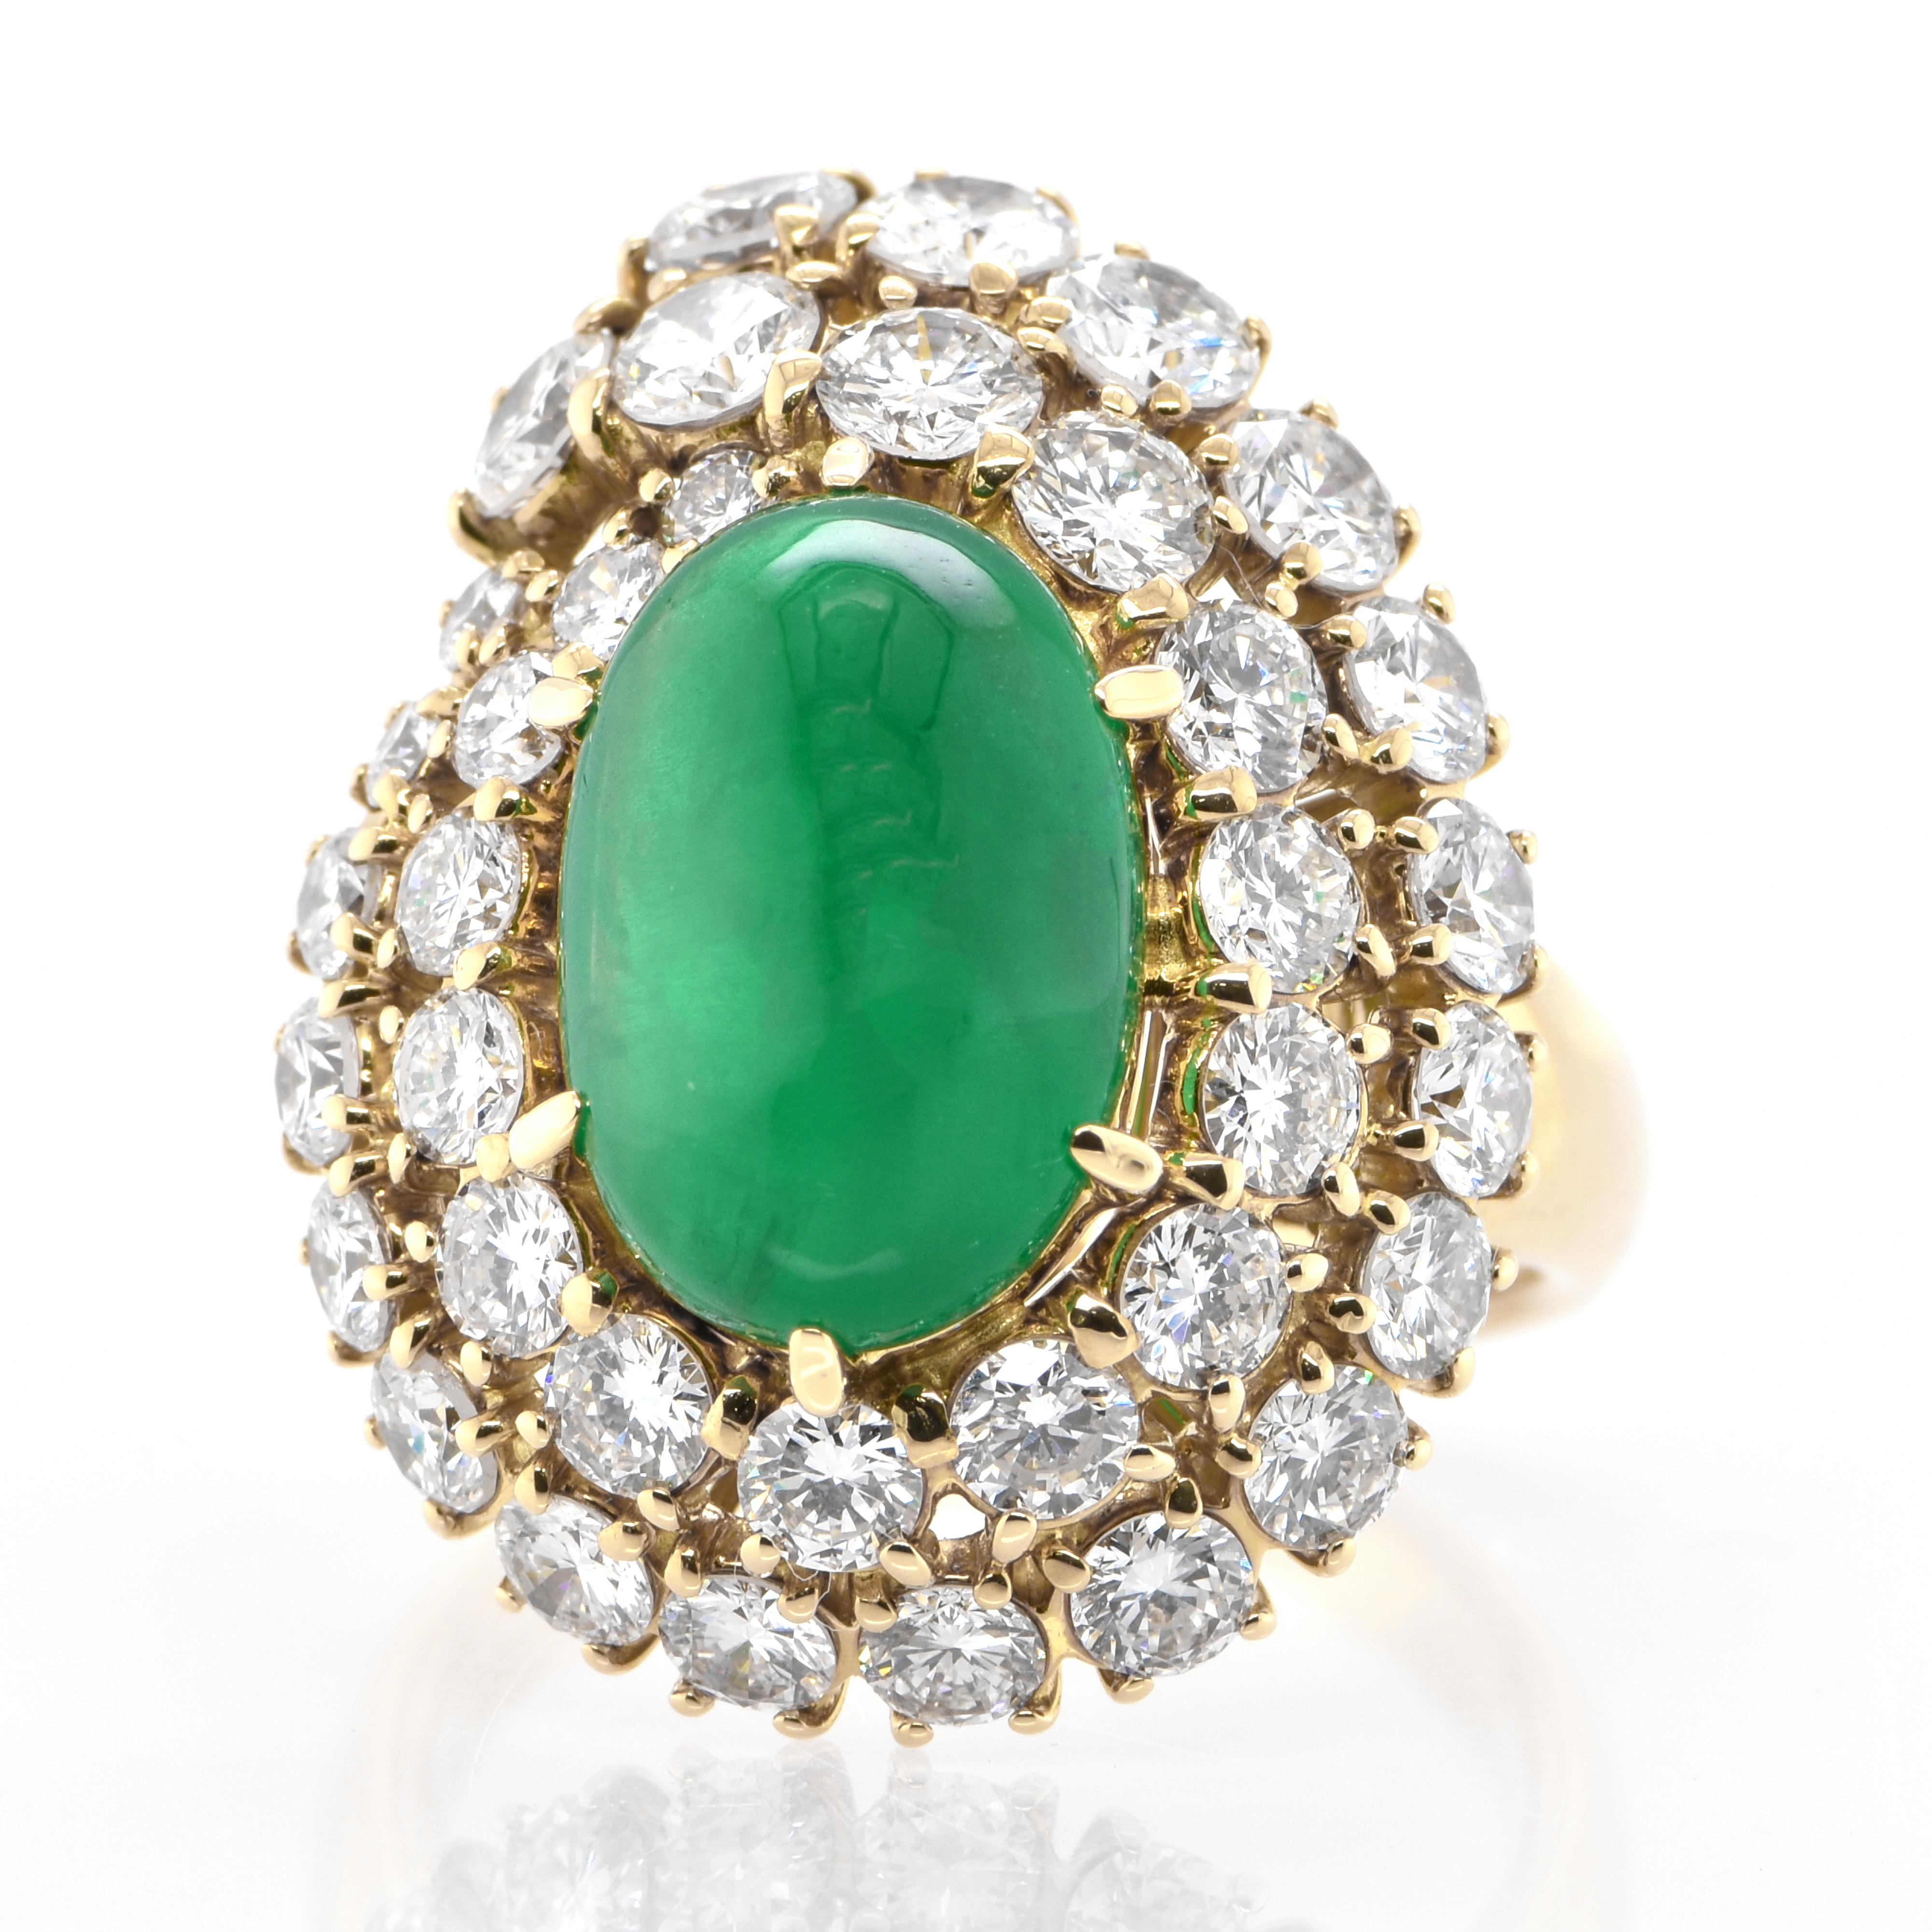 A stunning ring featuring a 5.30 Carat Natural Emerald Cabochon and 3.35 Carats of Diamond Accents set in 18 Karat Yellow Gold. People have admired emerald’s green for thousands of years. Emeralds have always been associated with the lushest